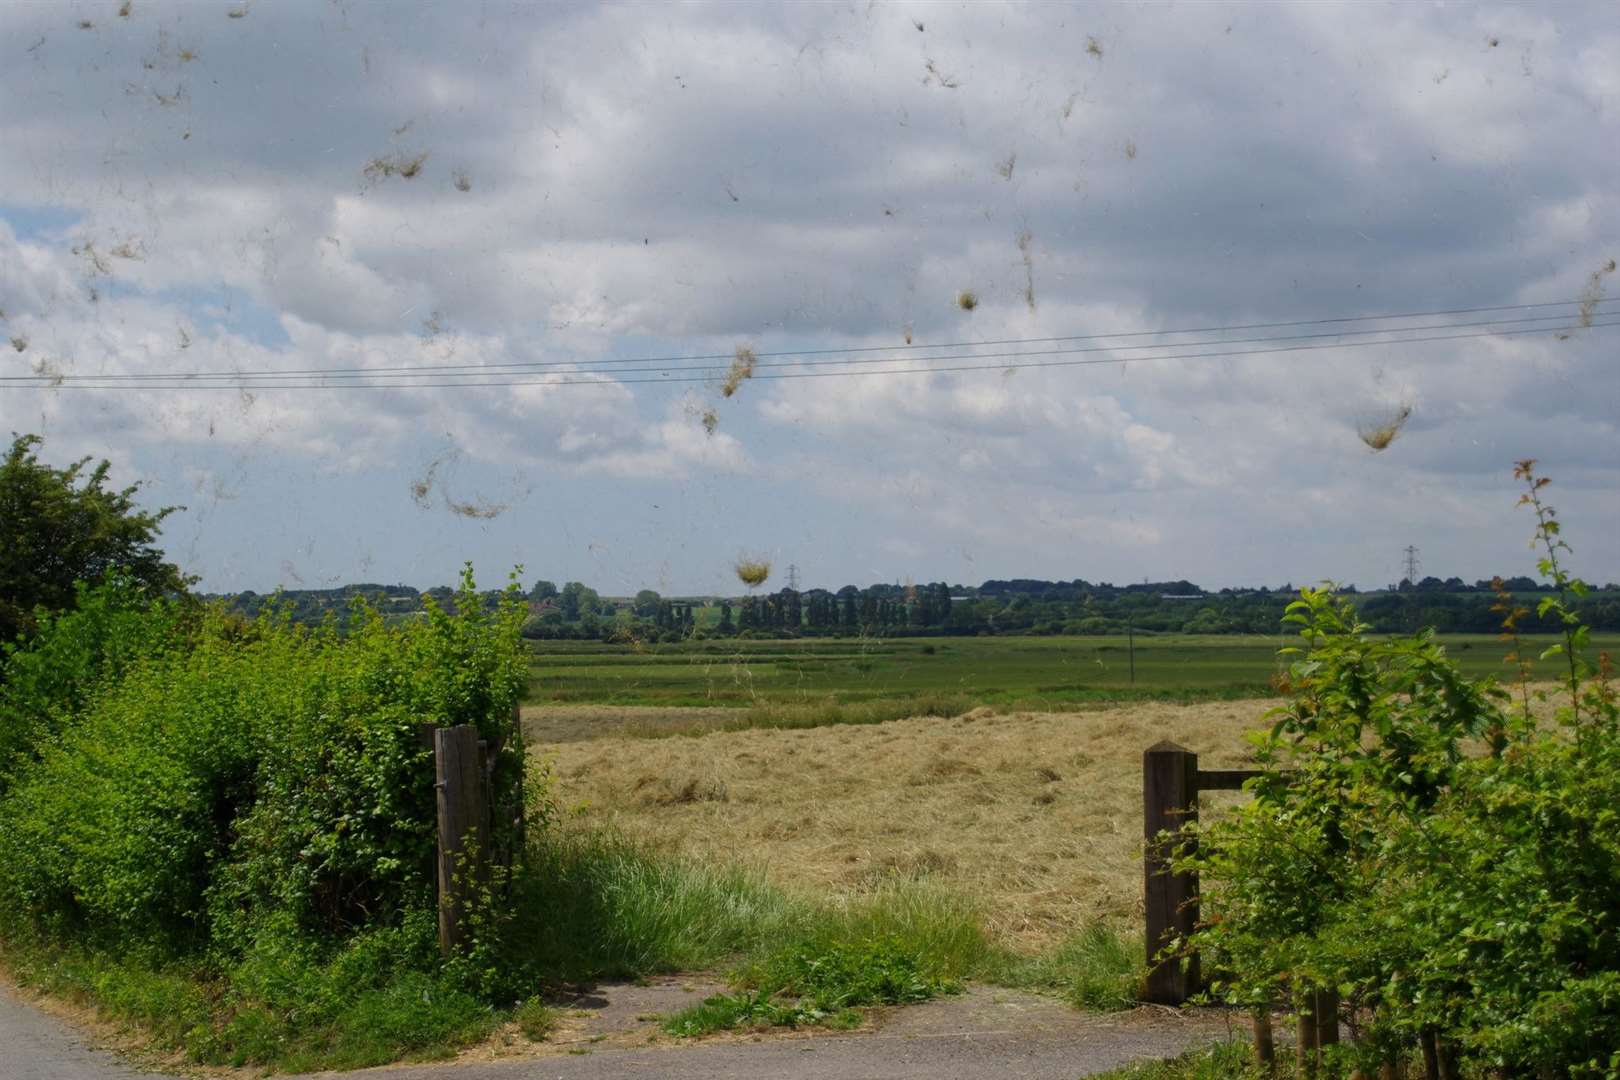 Grass was thrown into the air by a dust devil near Sandwich. Picture: Andy Vilday